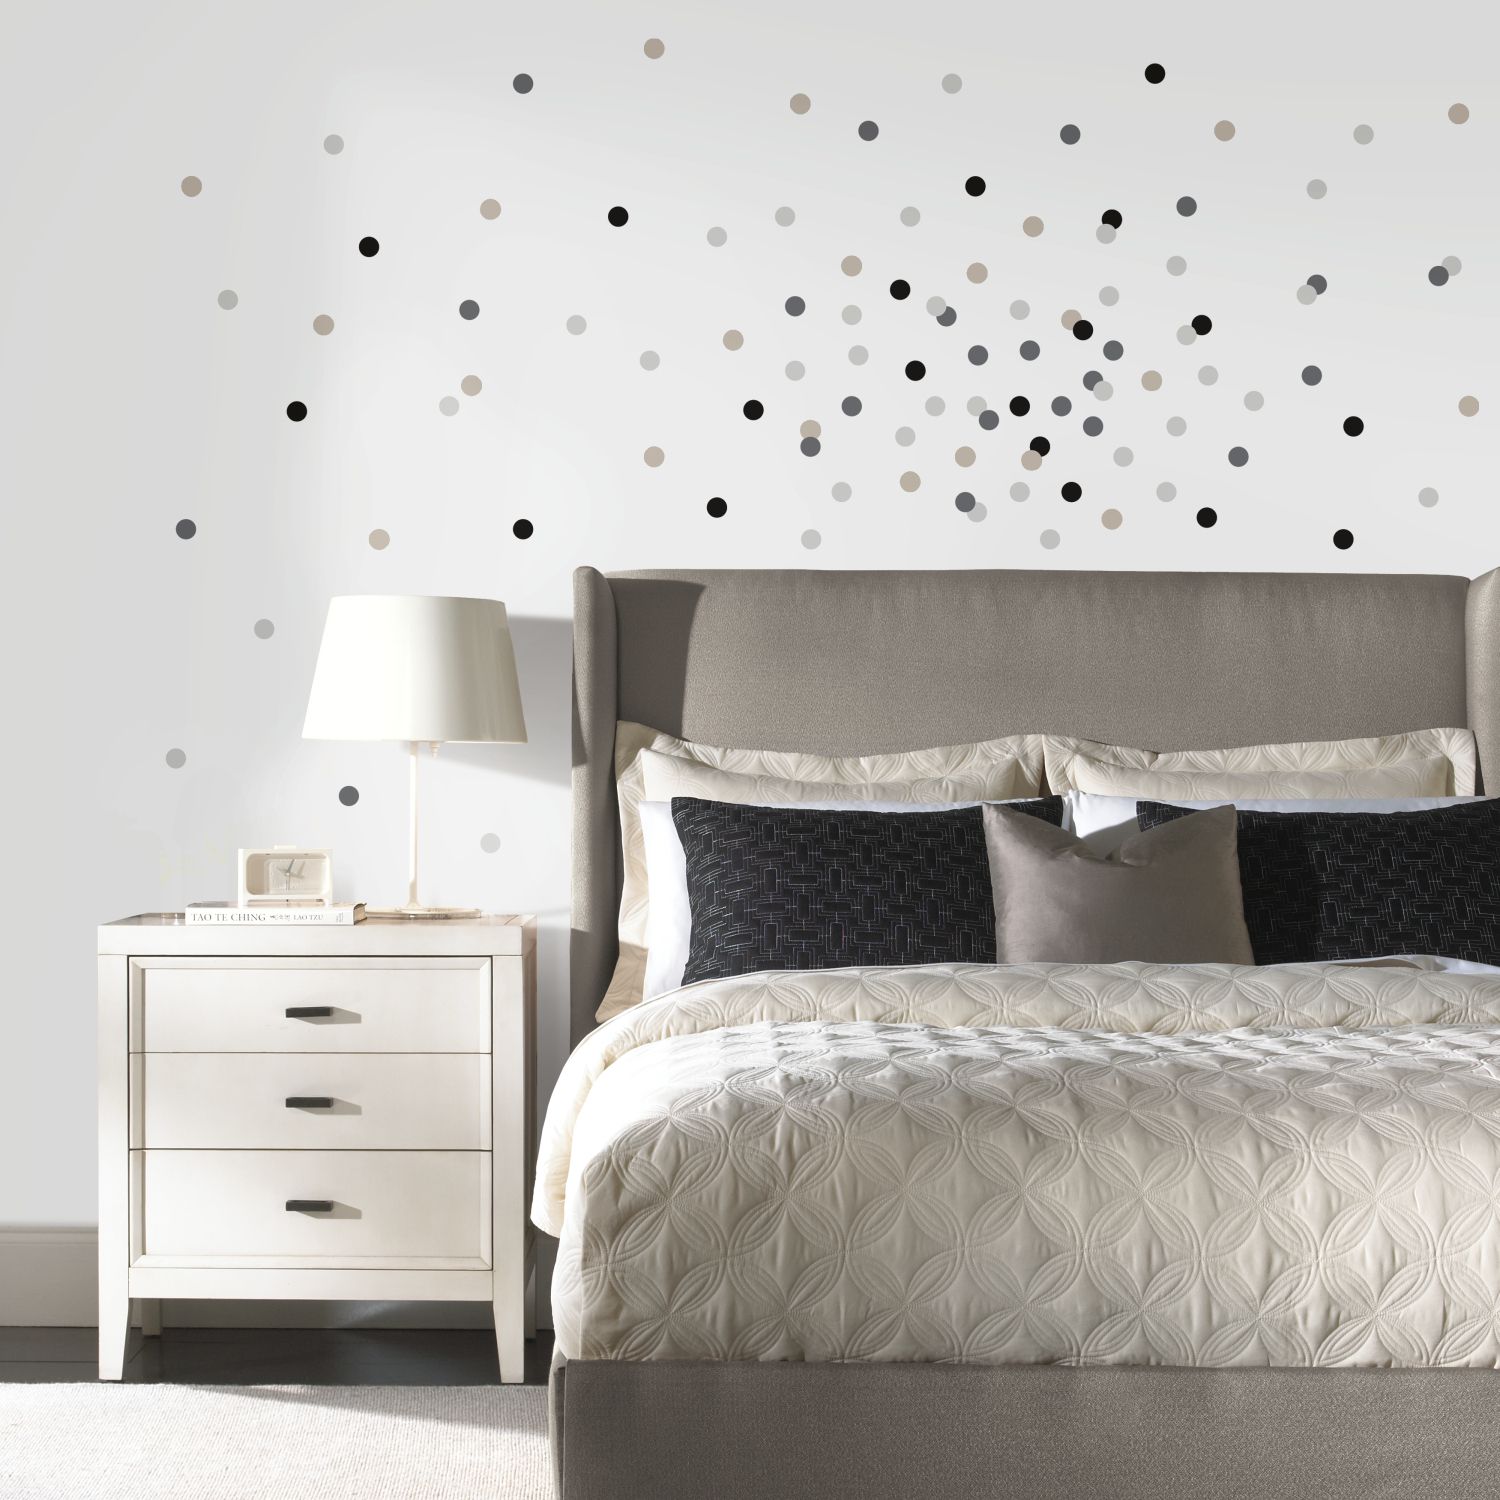 Black And Grey Confetti Dots Wall Art – Neutral Confetti Dots Wall Stickers Intended For Latest Dots Wall Art (View 15 of 20)